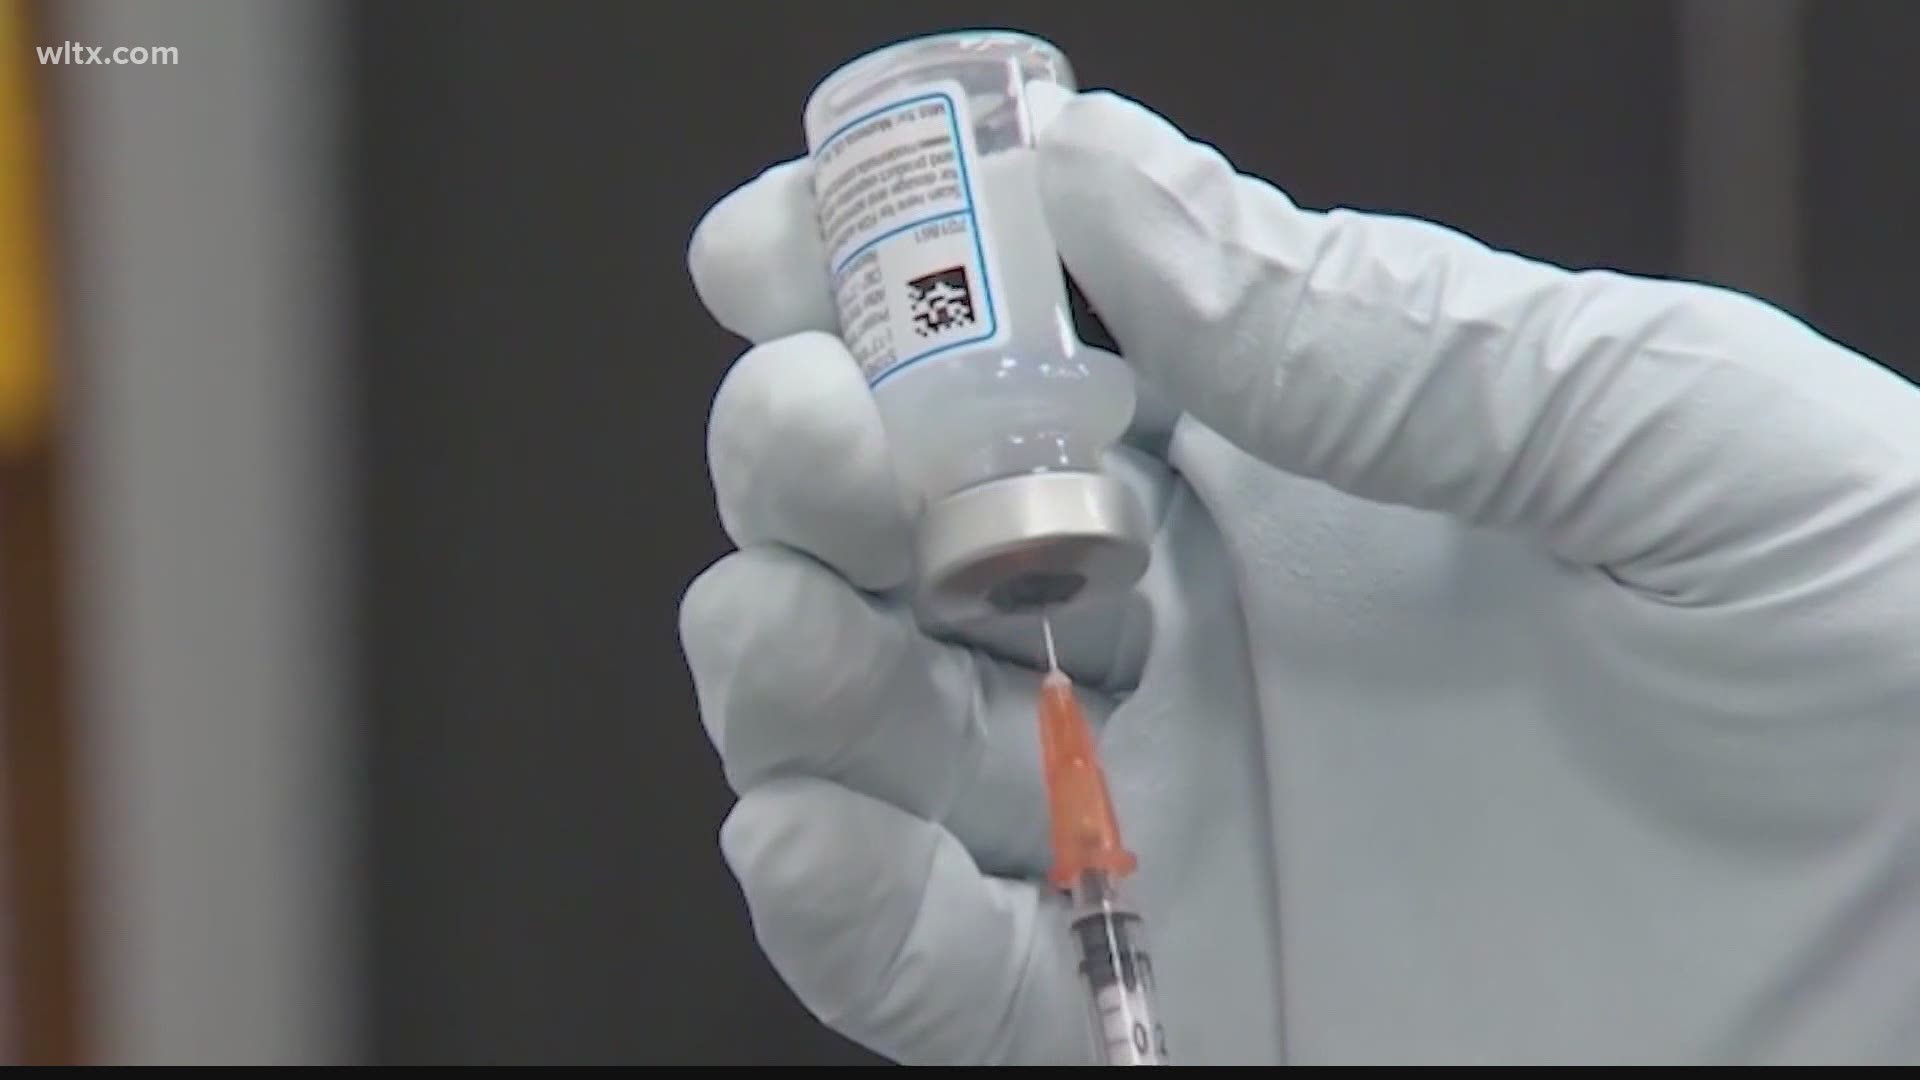 Health officials in South Carolina say they've seen an uptick in reports of patients not getting the second dose of the Pfizer or Moderna vaccines.